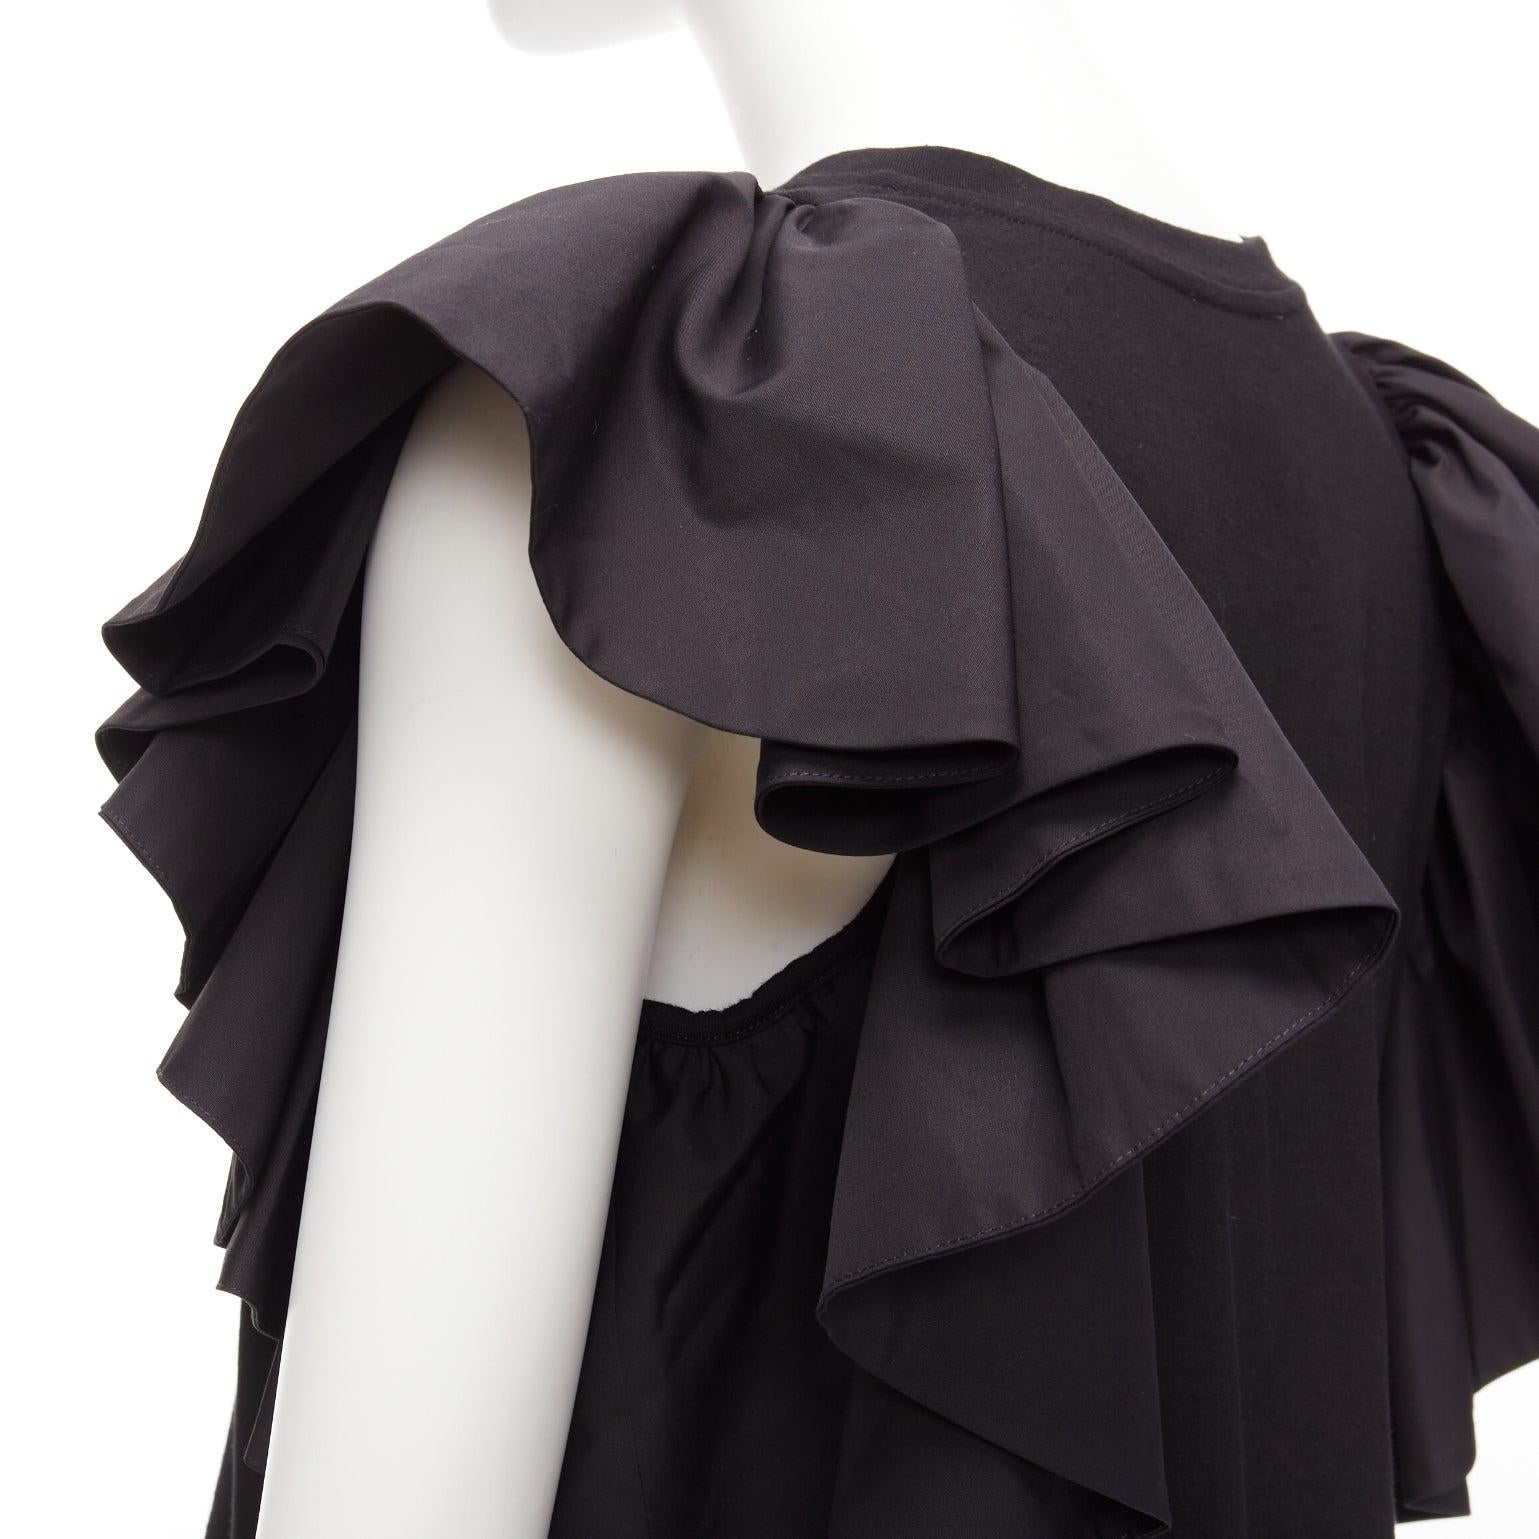 ALEXANDER MCQUEEN 2020 black ruffle cap sleeve bateau crop top IT38 XS
Reference: AAWC/A00799
Brand: Alexander McQueen
Designer: Sarah Burton
Collection: 2020
Material: Cotton
Color: Black
Pattern: Solid
Closure: Slip On
Lining: Black Cotton
Made